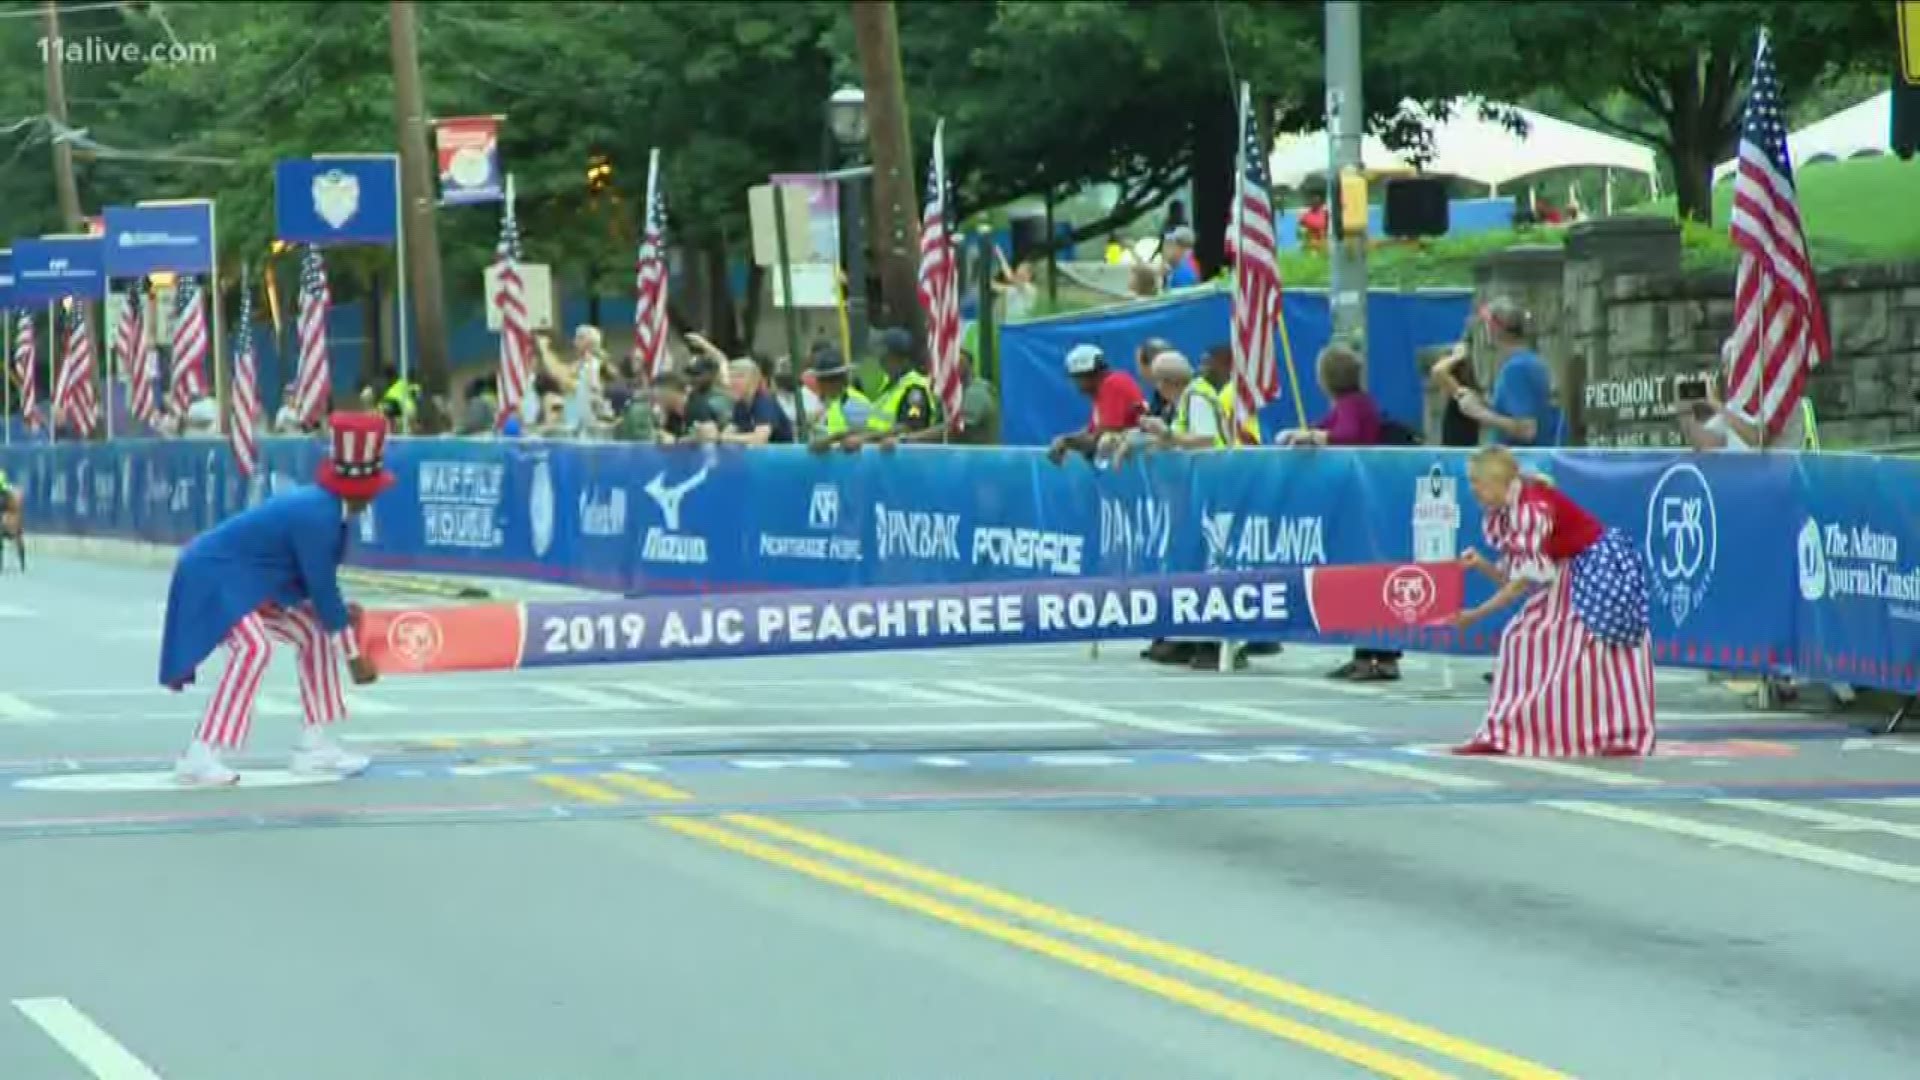 Daniel Romanchuk set an unofficial event record and is set to receive $50,000 for winning the men's wheelchair division of the 50th AJC Peachtree Road Race.